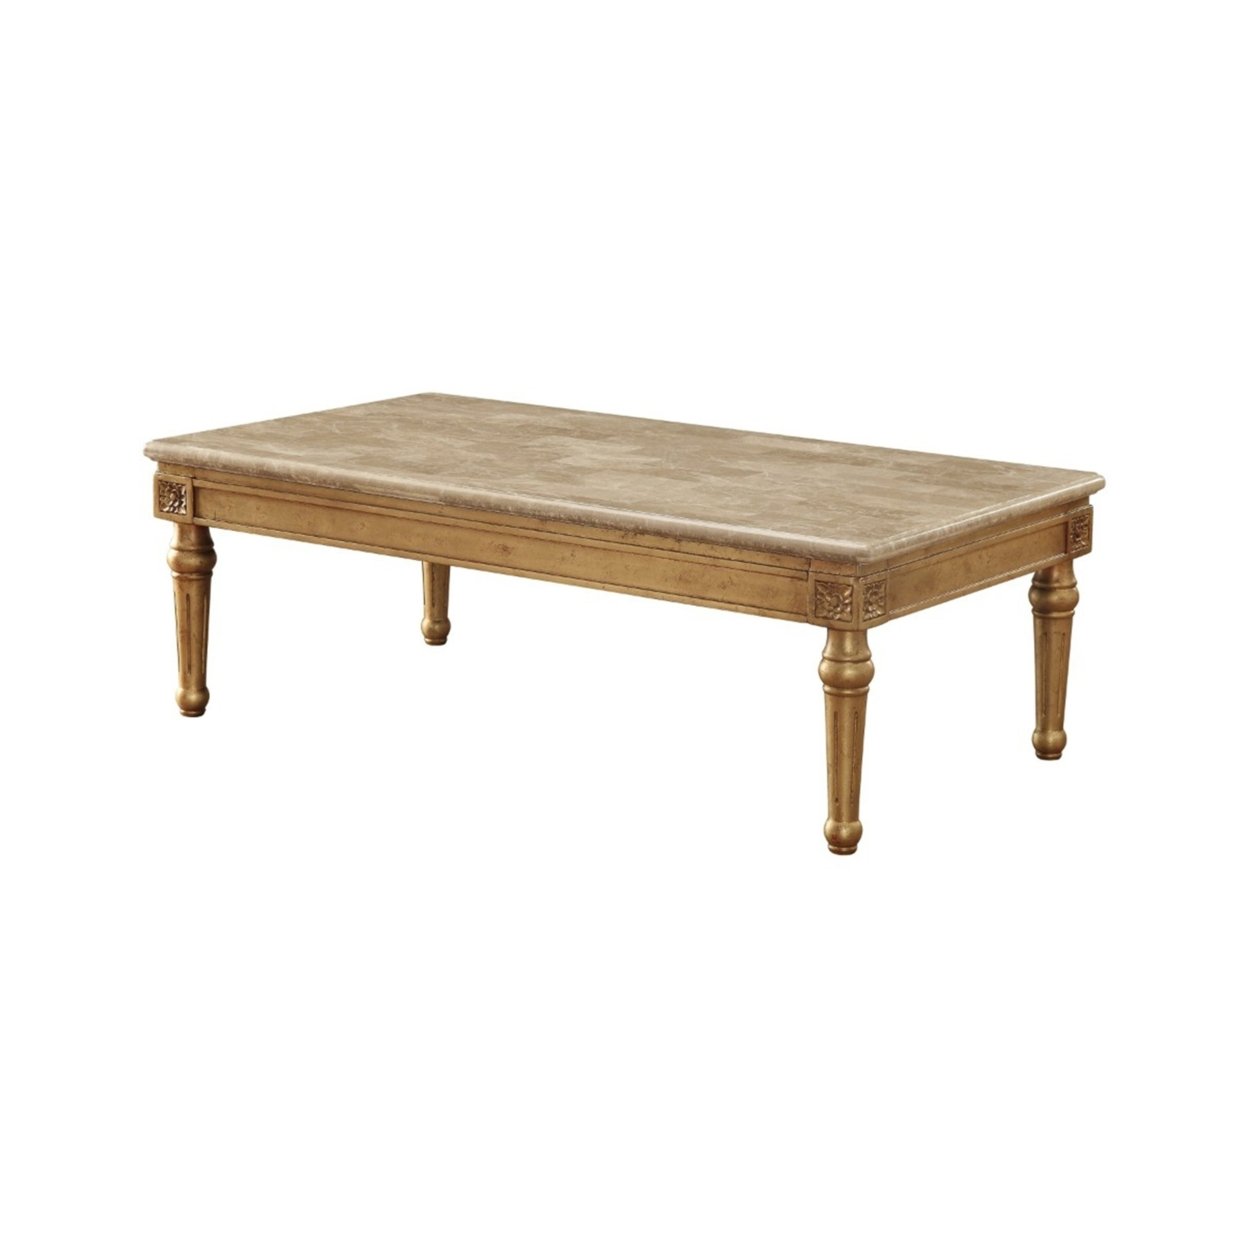 Traditional Style Rectangular Wood And Marble Coffee Table, Gold- Saltoro Sherpi